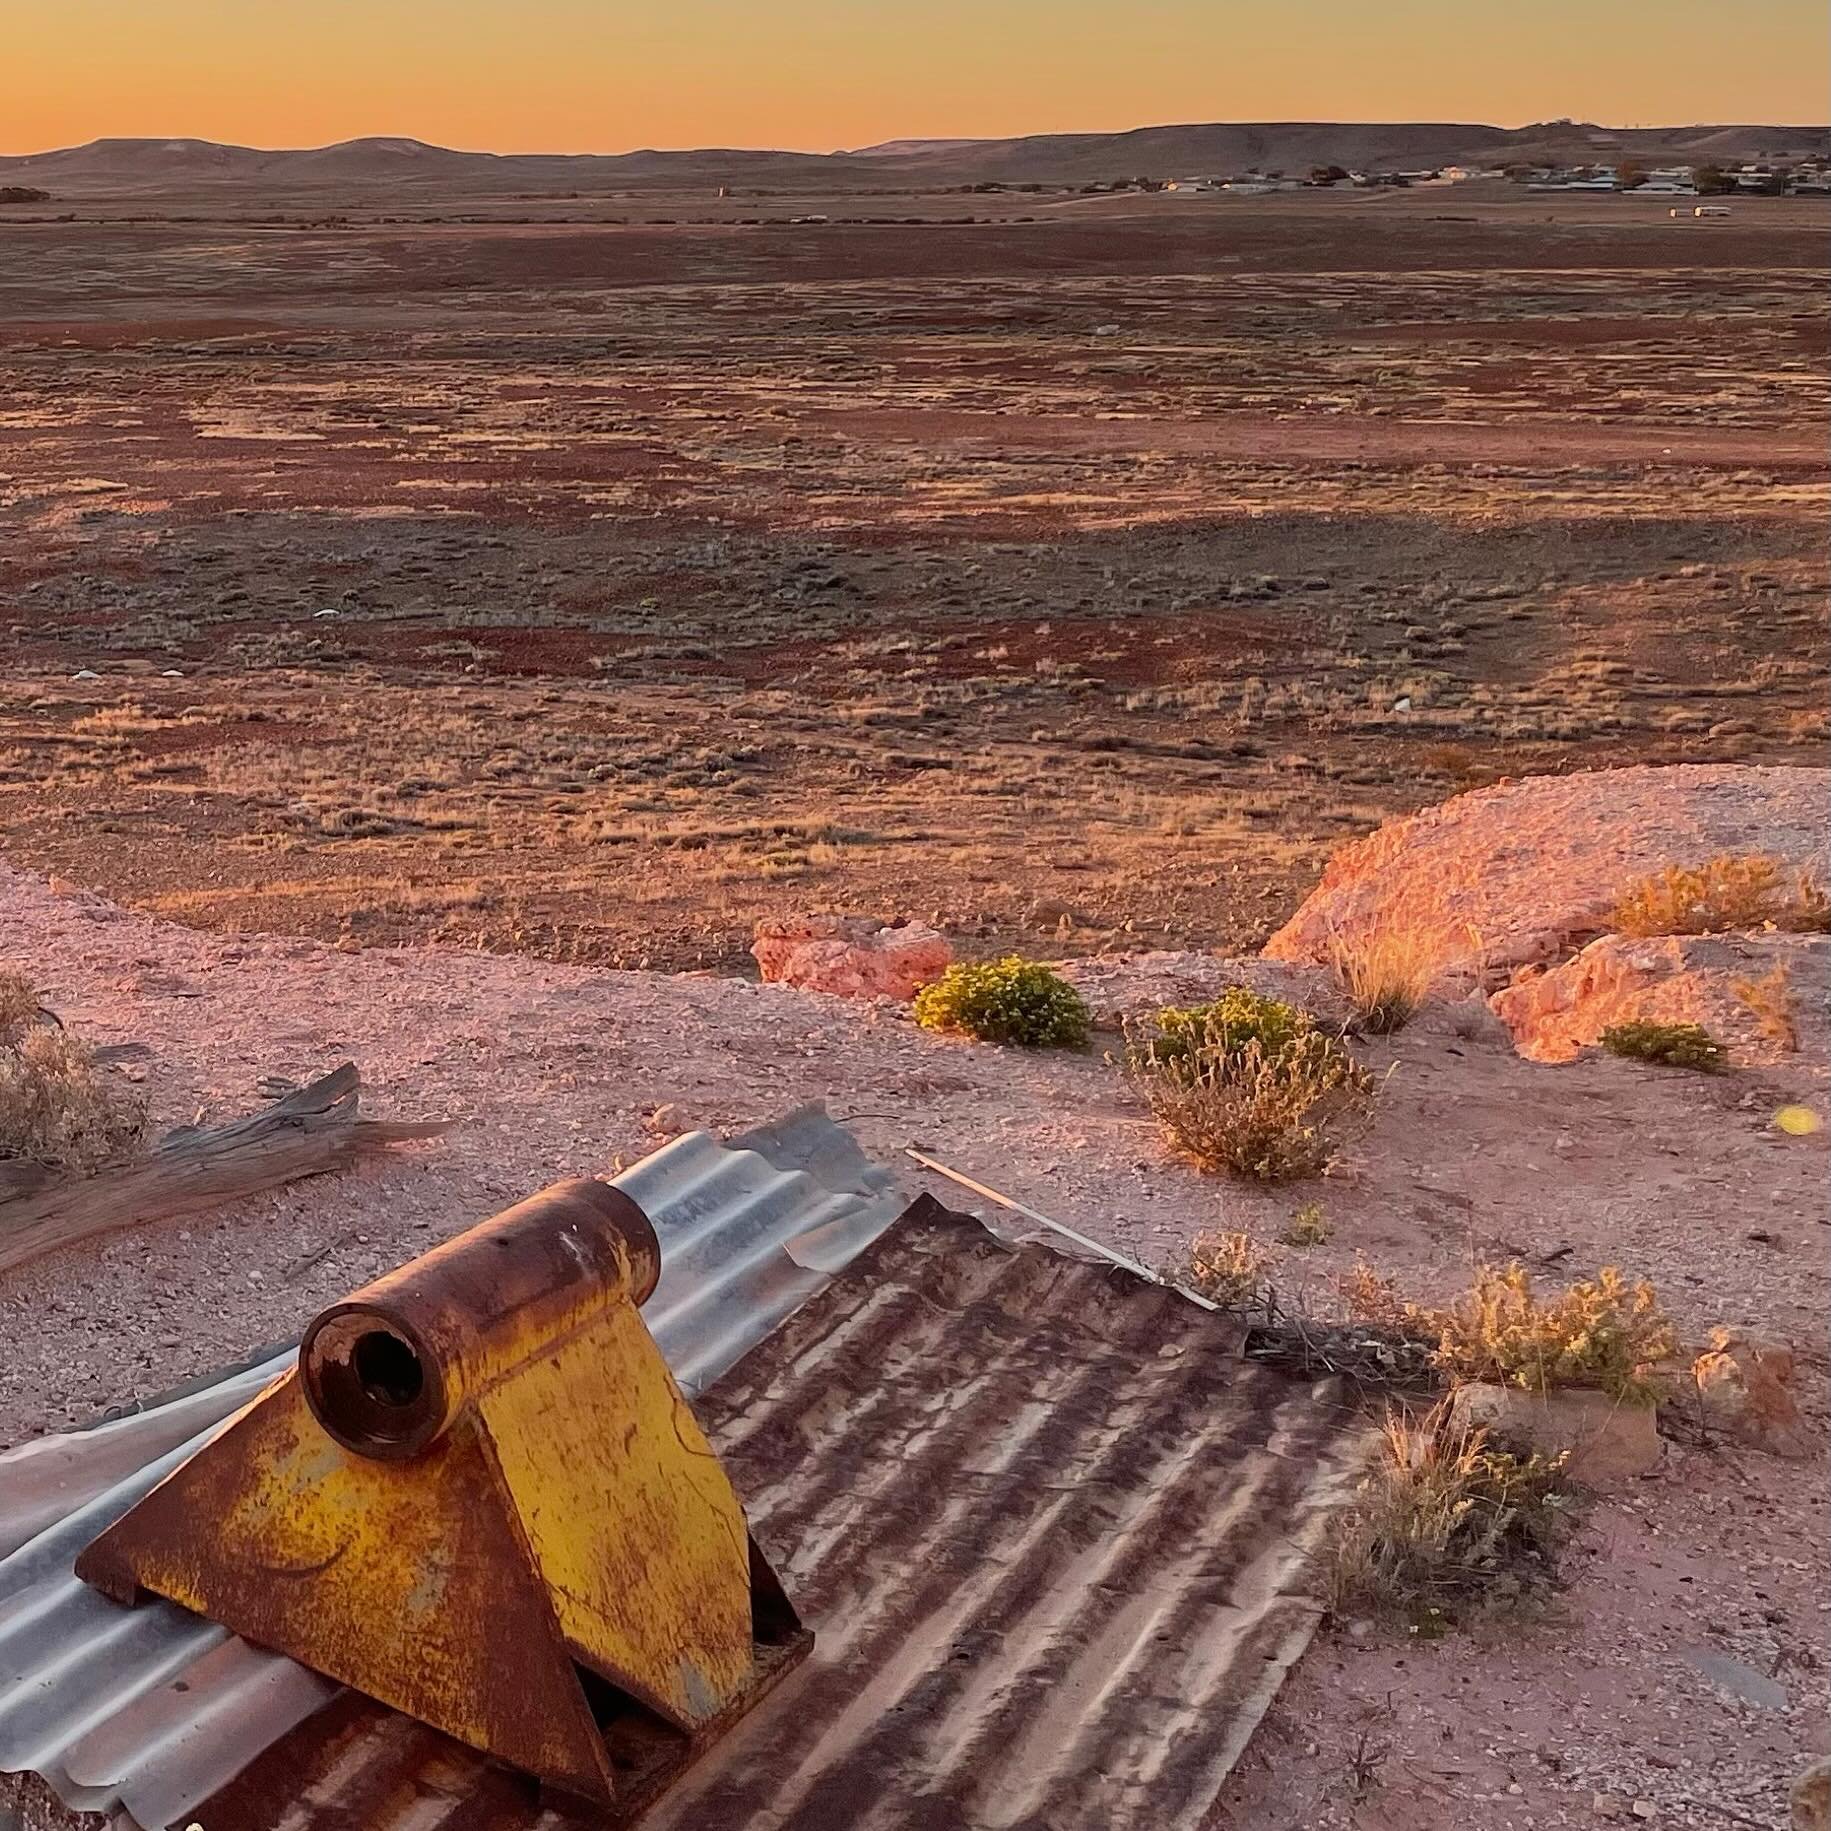 Colours of rust. Looking out from Coober Pedy, Thursday 28 July 2022 at 07:22 am. Traveling Australia by car and thinking about distance, value, and materials.